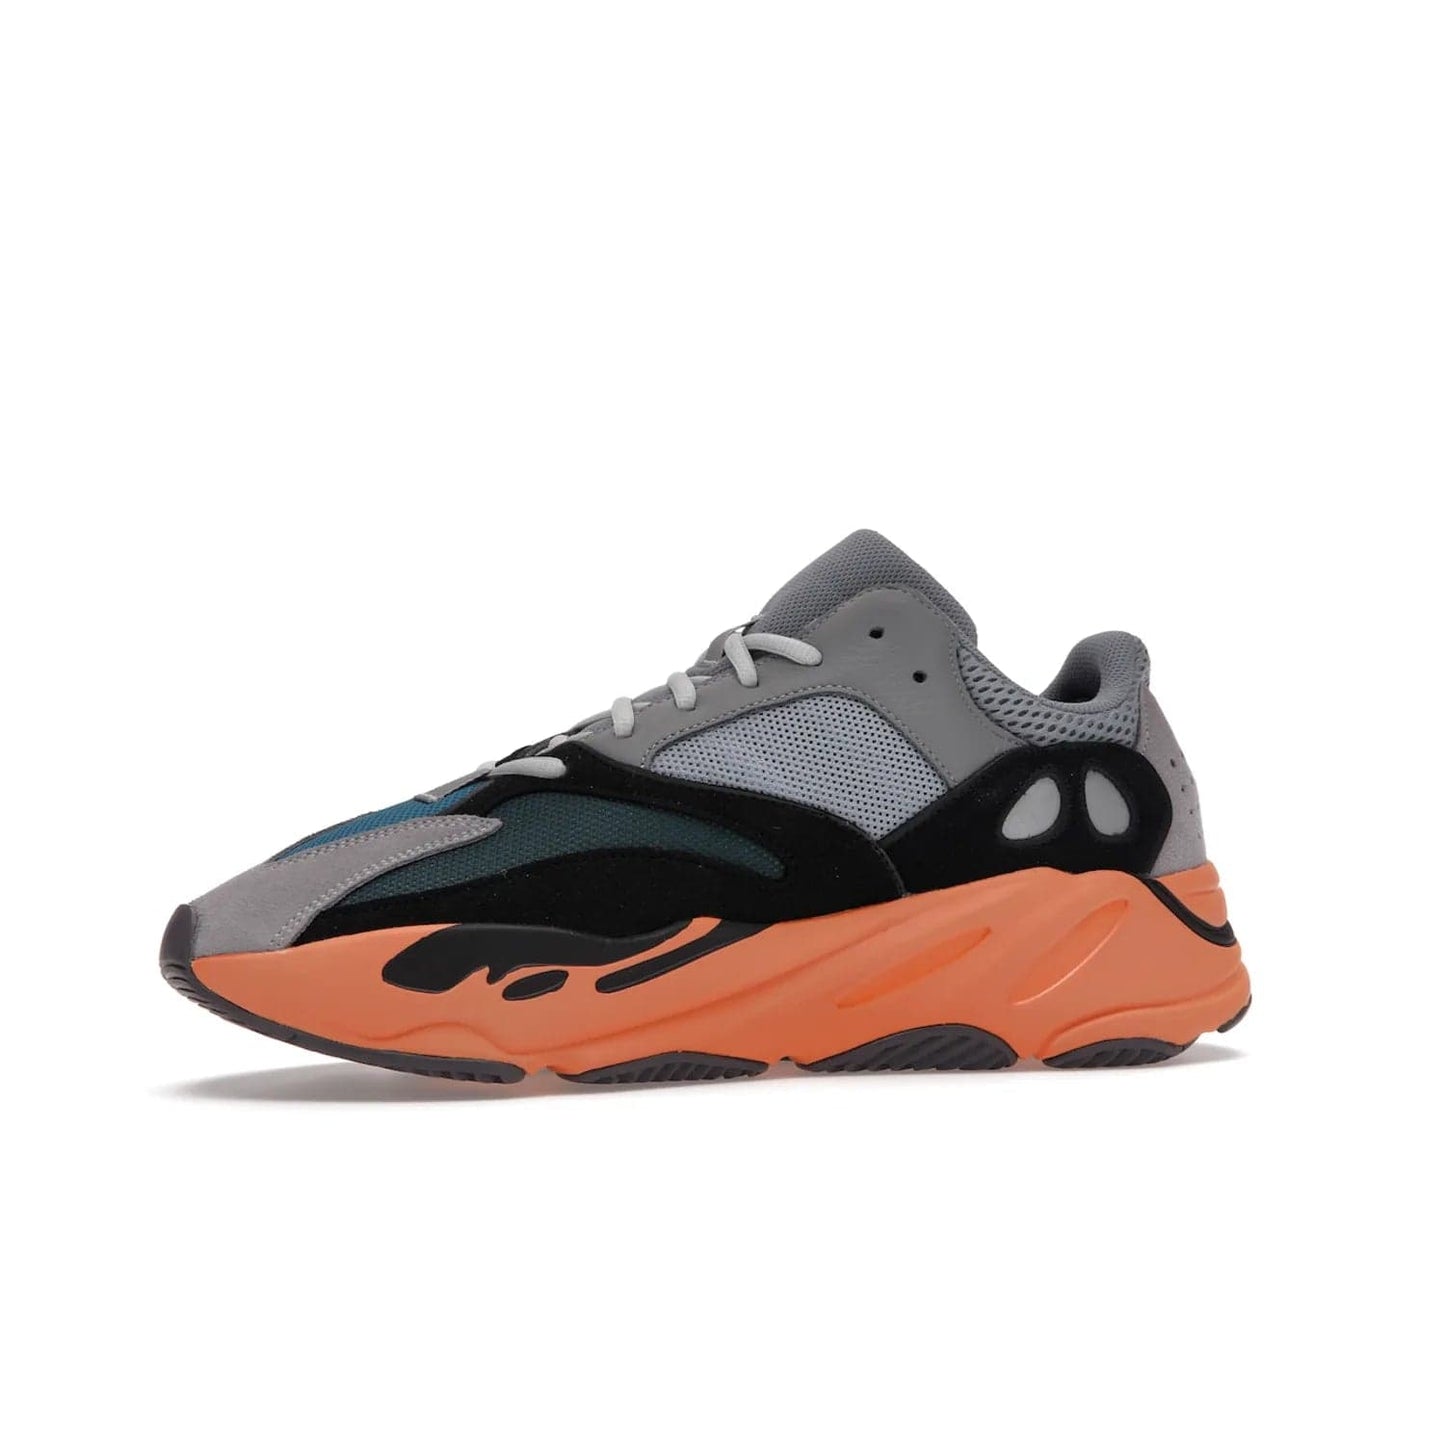 adidas Yeezy Boost 700 Wash Orange - Image 17 - Only at www.BallersClubKickz.com - Introducing the adidas Yeezy Boost 700 Wash Orange. Unique grey leather, suede, mesh upper and teal panels with a chunky Wash Orange Boost midsole. Release October 2021, make a statement today!